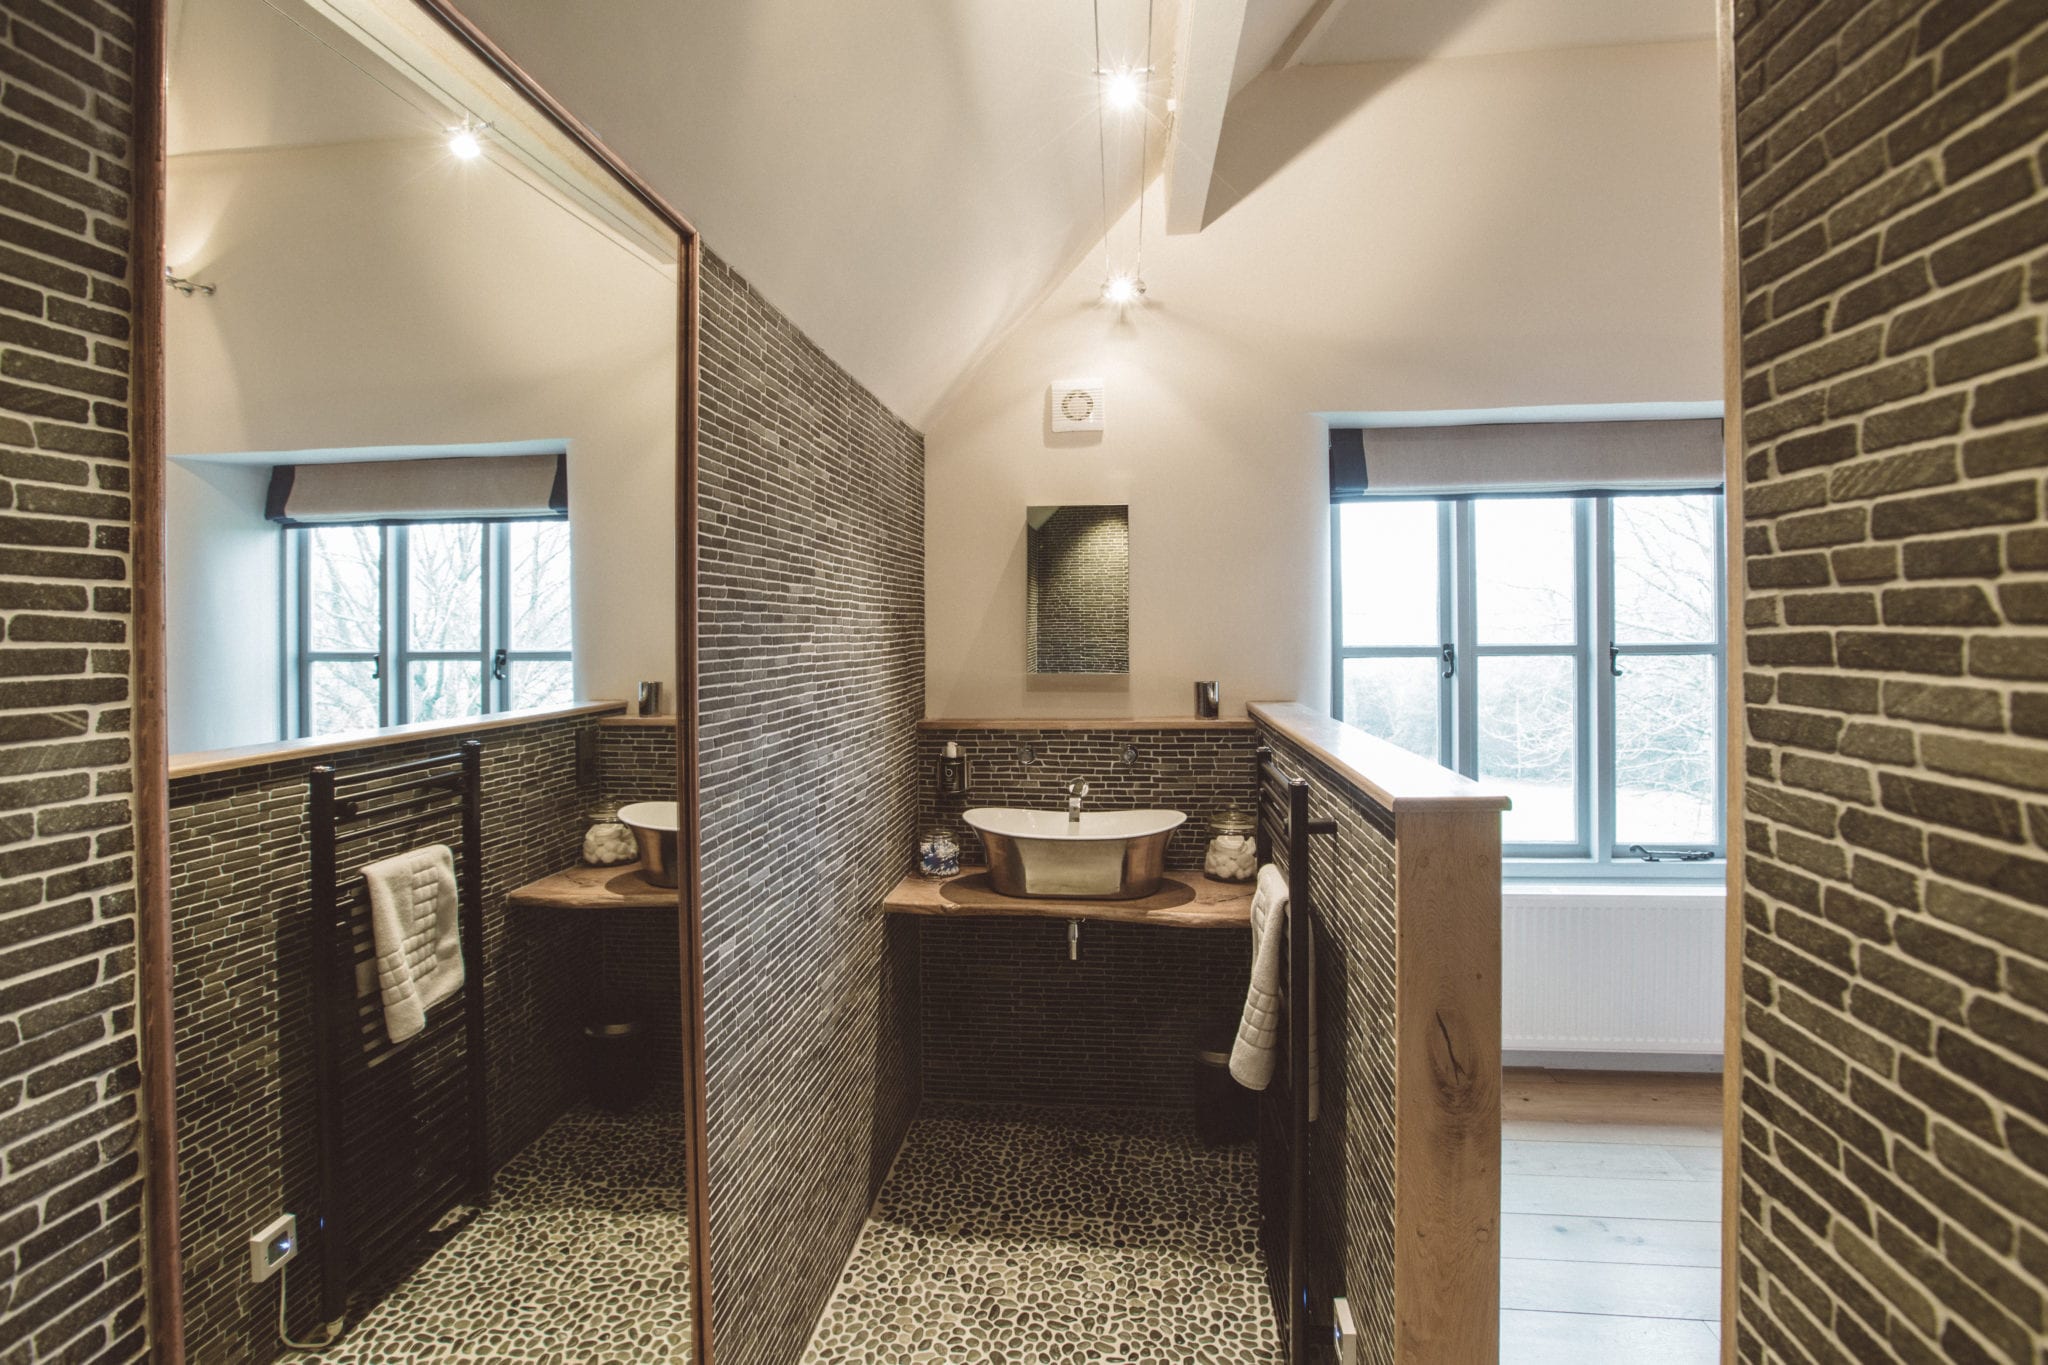 The Barn bathroom with basin and walk in shower